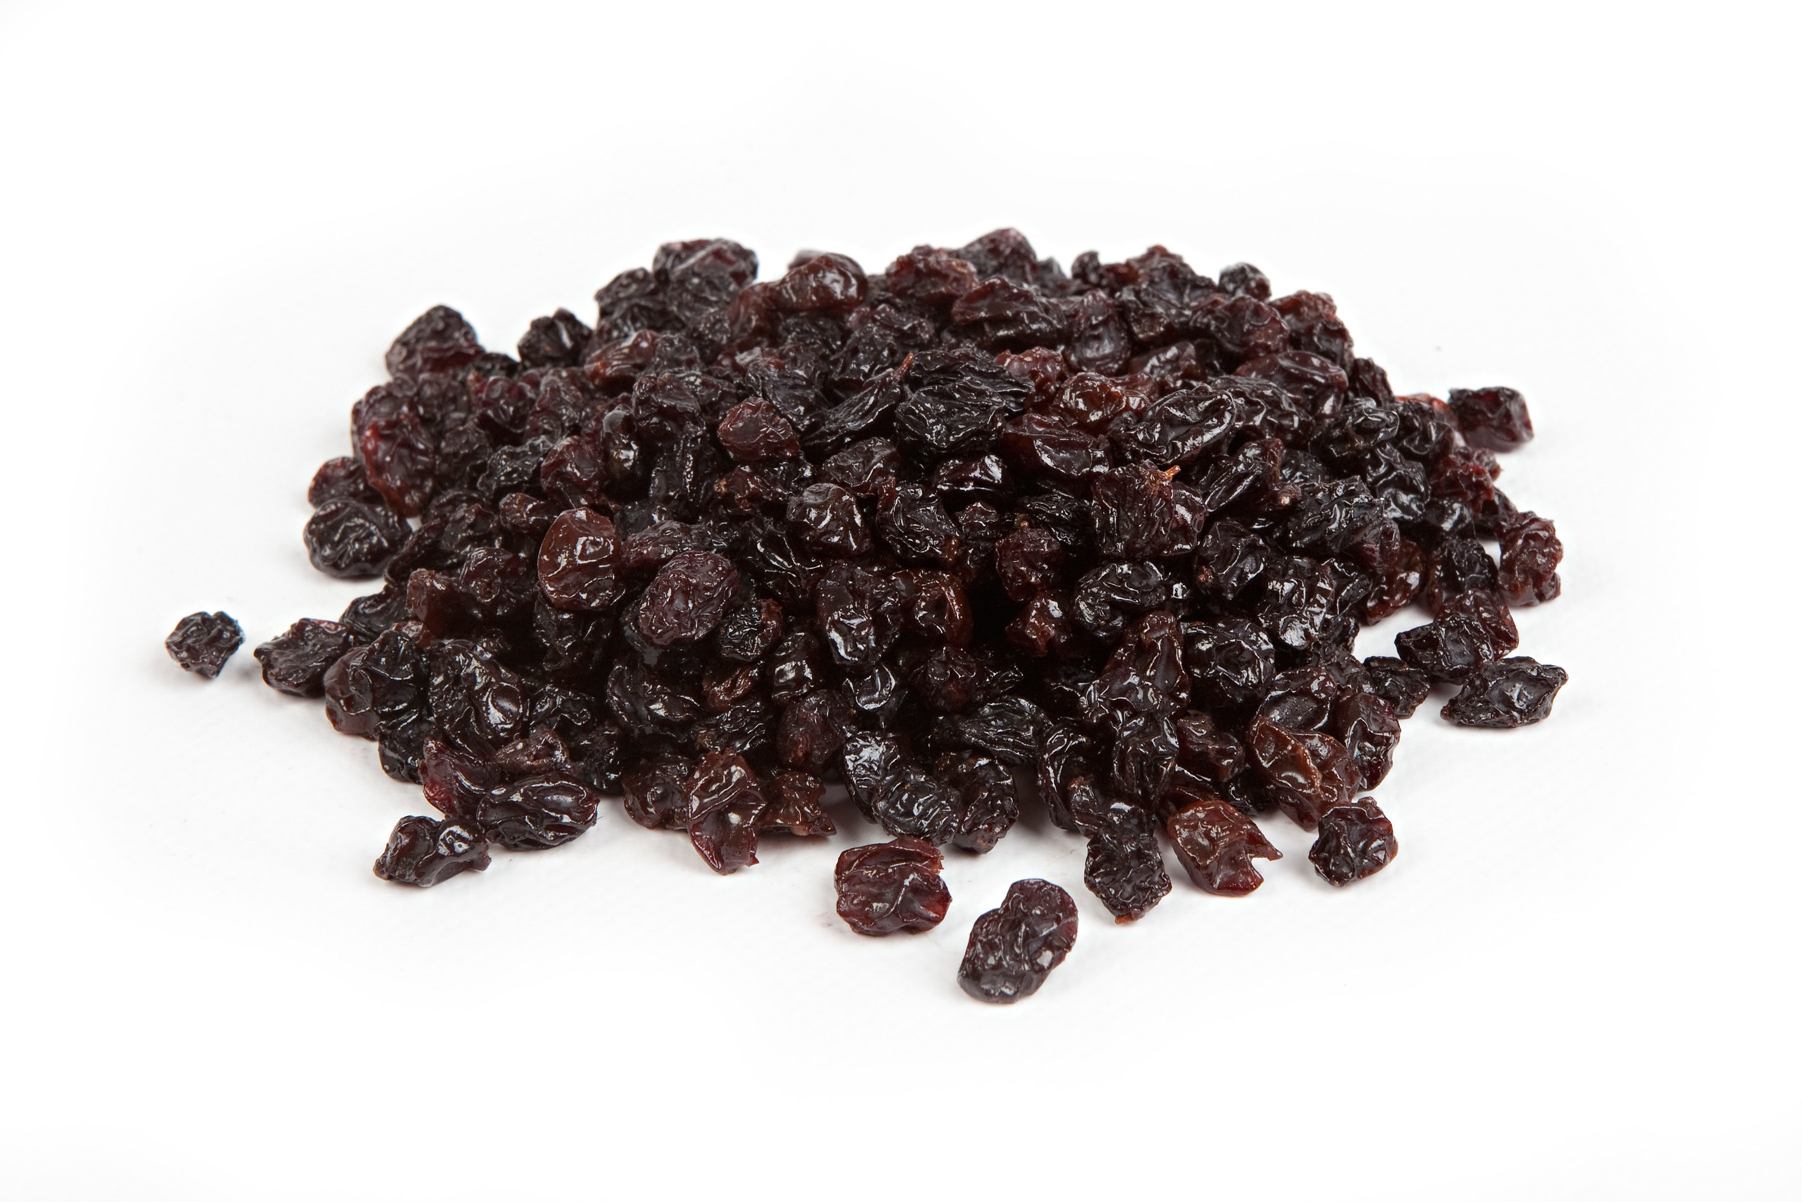 who invented raisins what does the word raisin mean in french and where did the dried grape come from